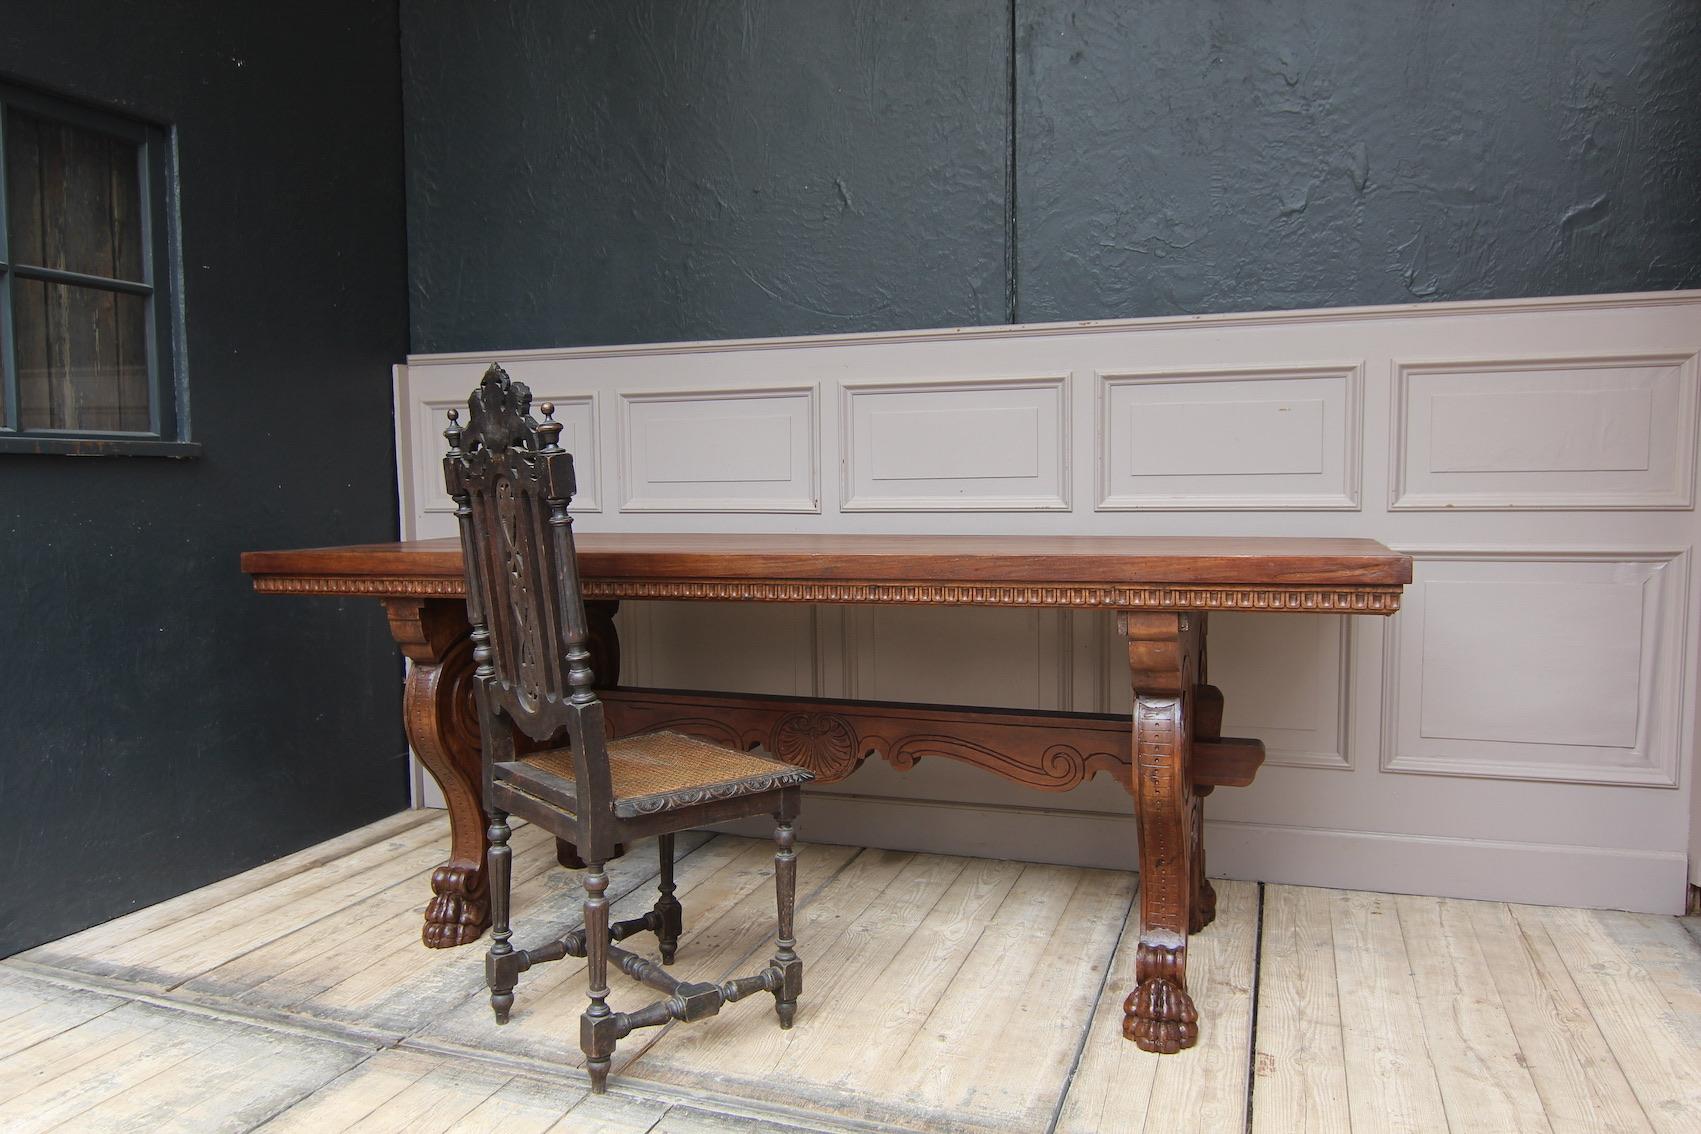 A 19th century Italian writing desk in renaissance revival style made of solid walnut.

The table can be used as a writing desk or as a dining table. Both sides look the same. 

Feet in the form of large double volutes that merge into